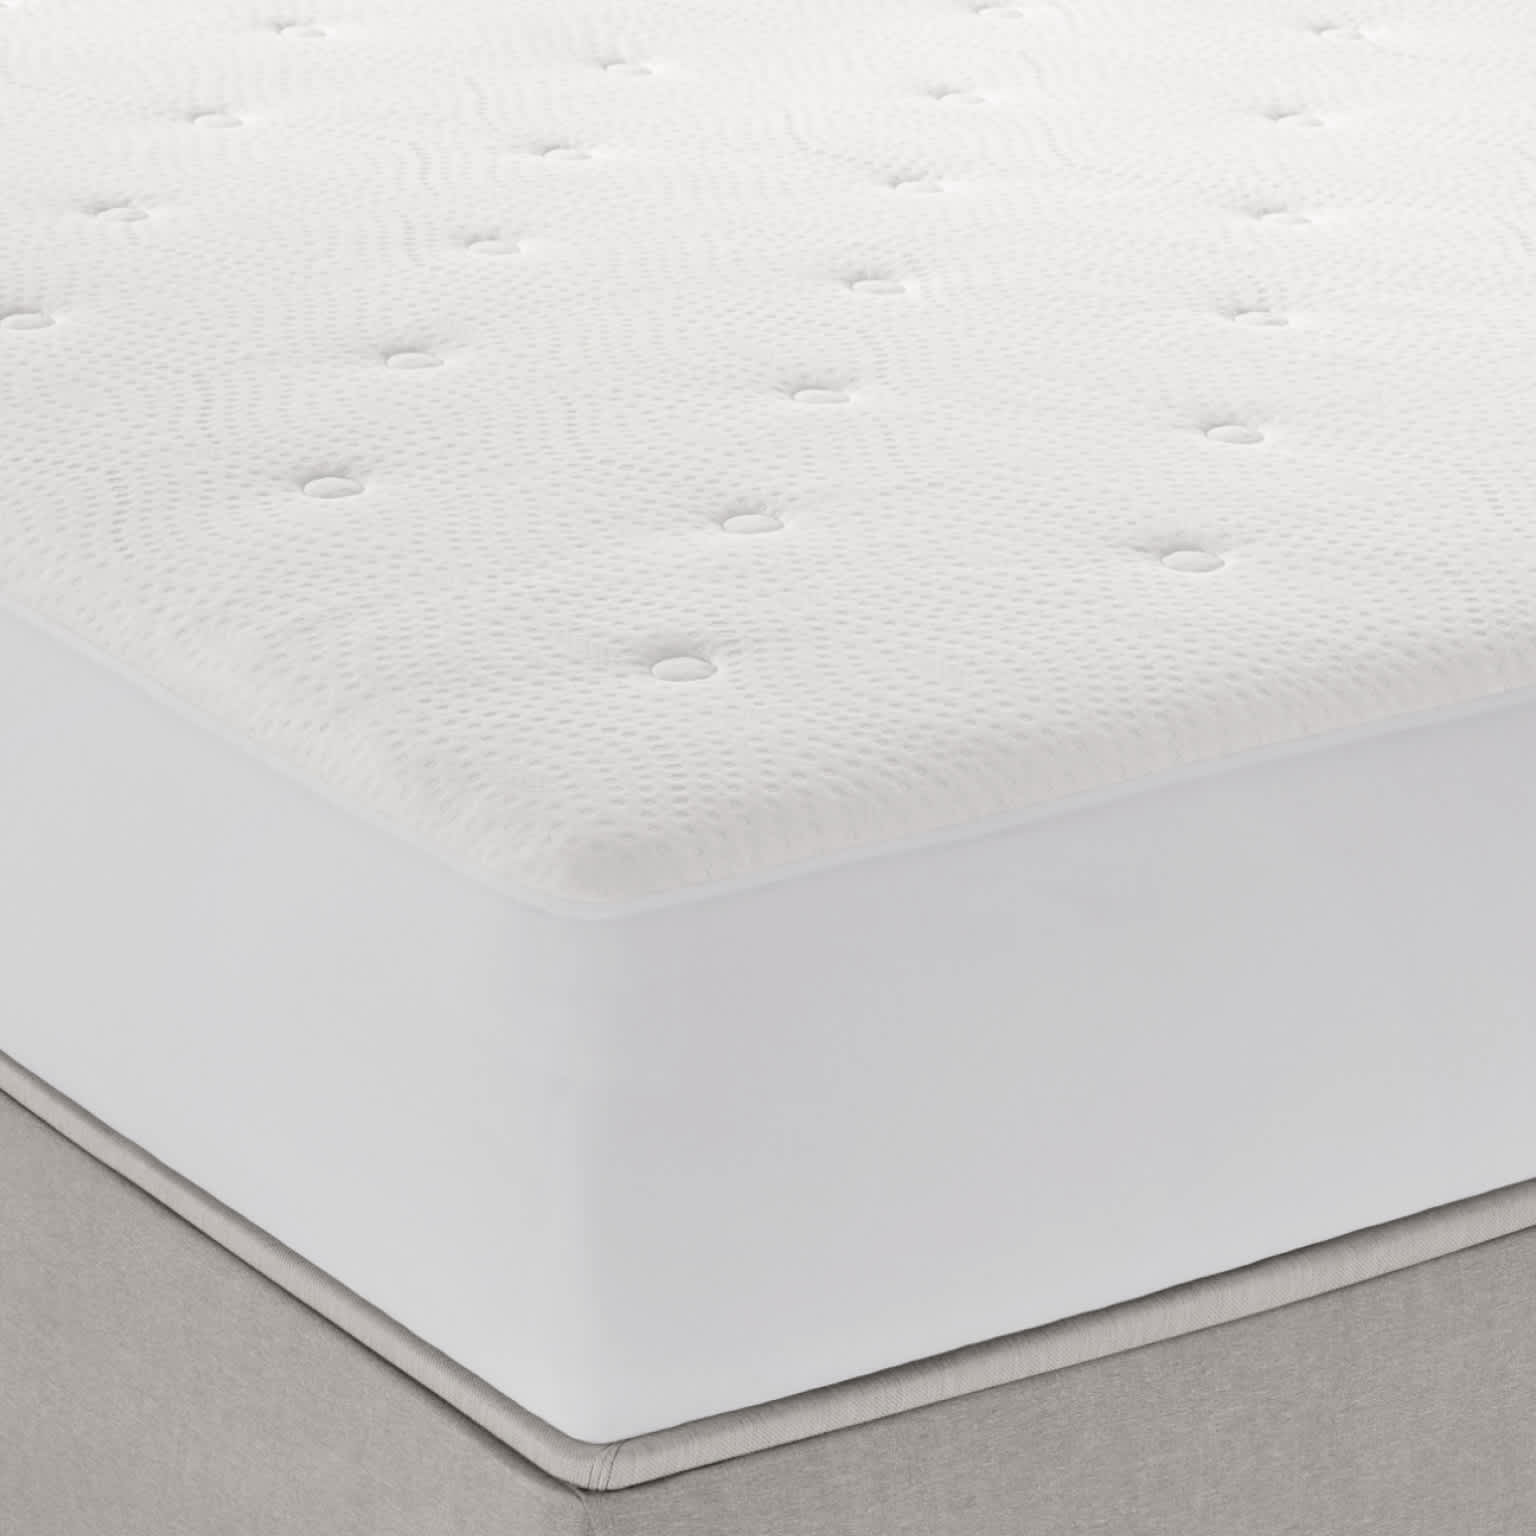 https://cdn.sleepnumber.com/image/upload/f_auto,q_auto:eco/v1682709952/workarea/catalog/product_images/climate360-total-protection-mattress-pad/C360-TPMP_PDP_Postcard_Gallery1